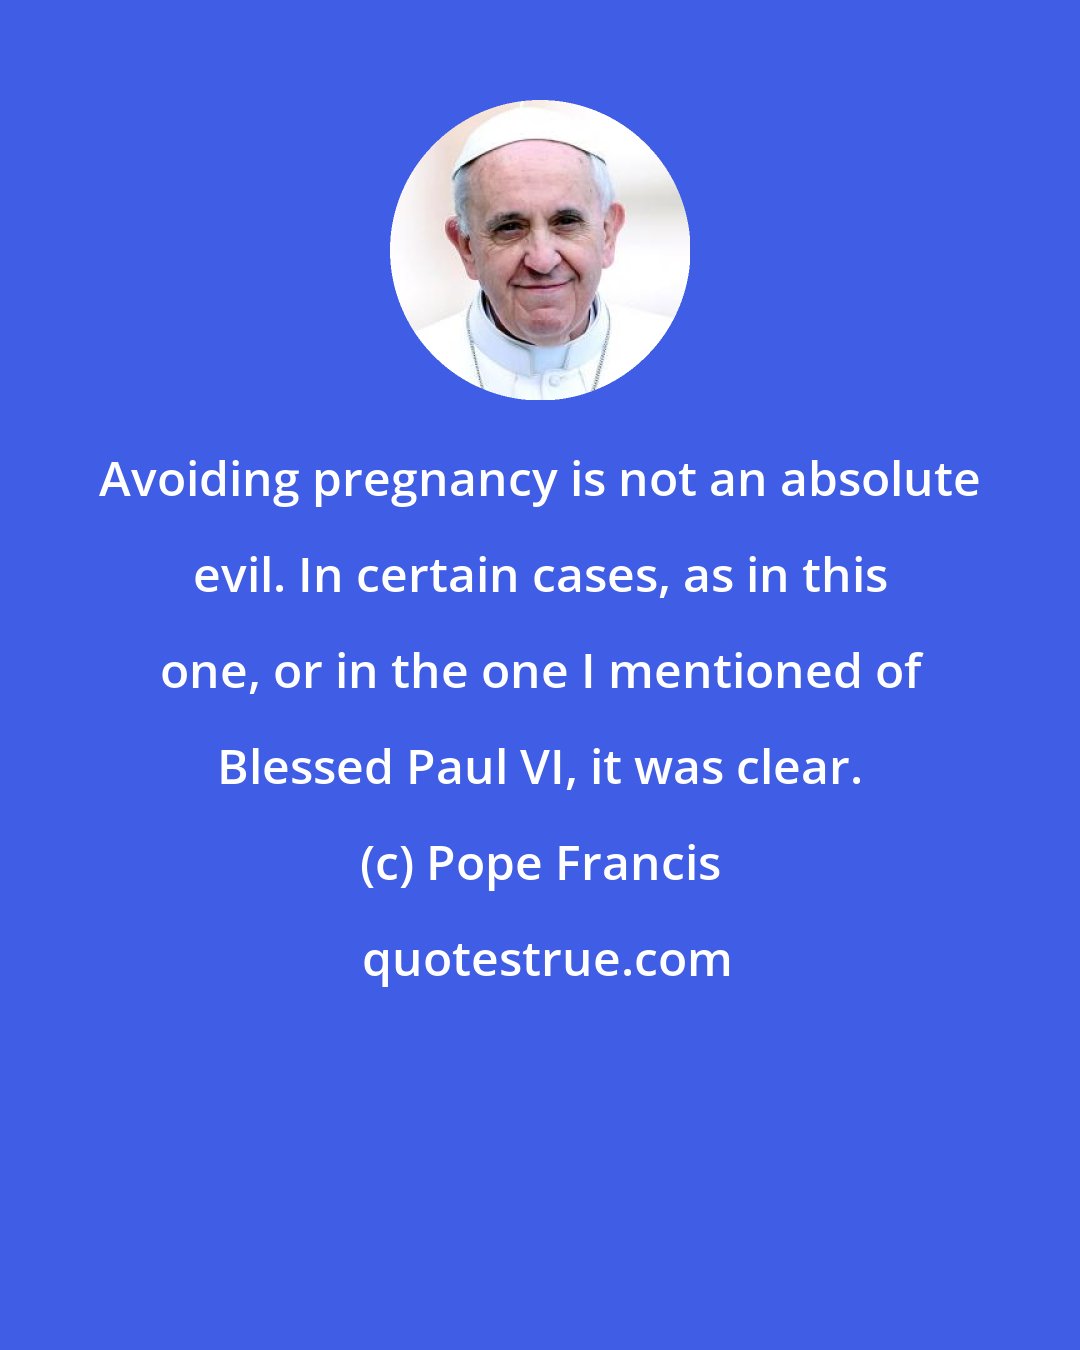 Pope Francis: Avoiding pregnancy is not an absolute evil. In certain cases, as in this one, or in the one I mentioned of Blessed Paul VI, it was clear.